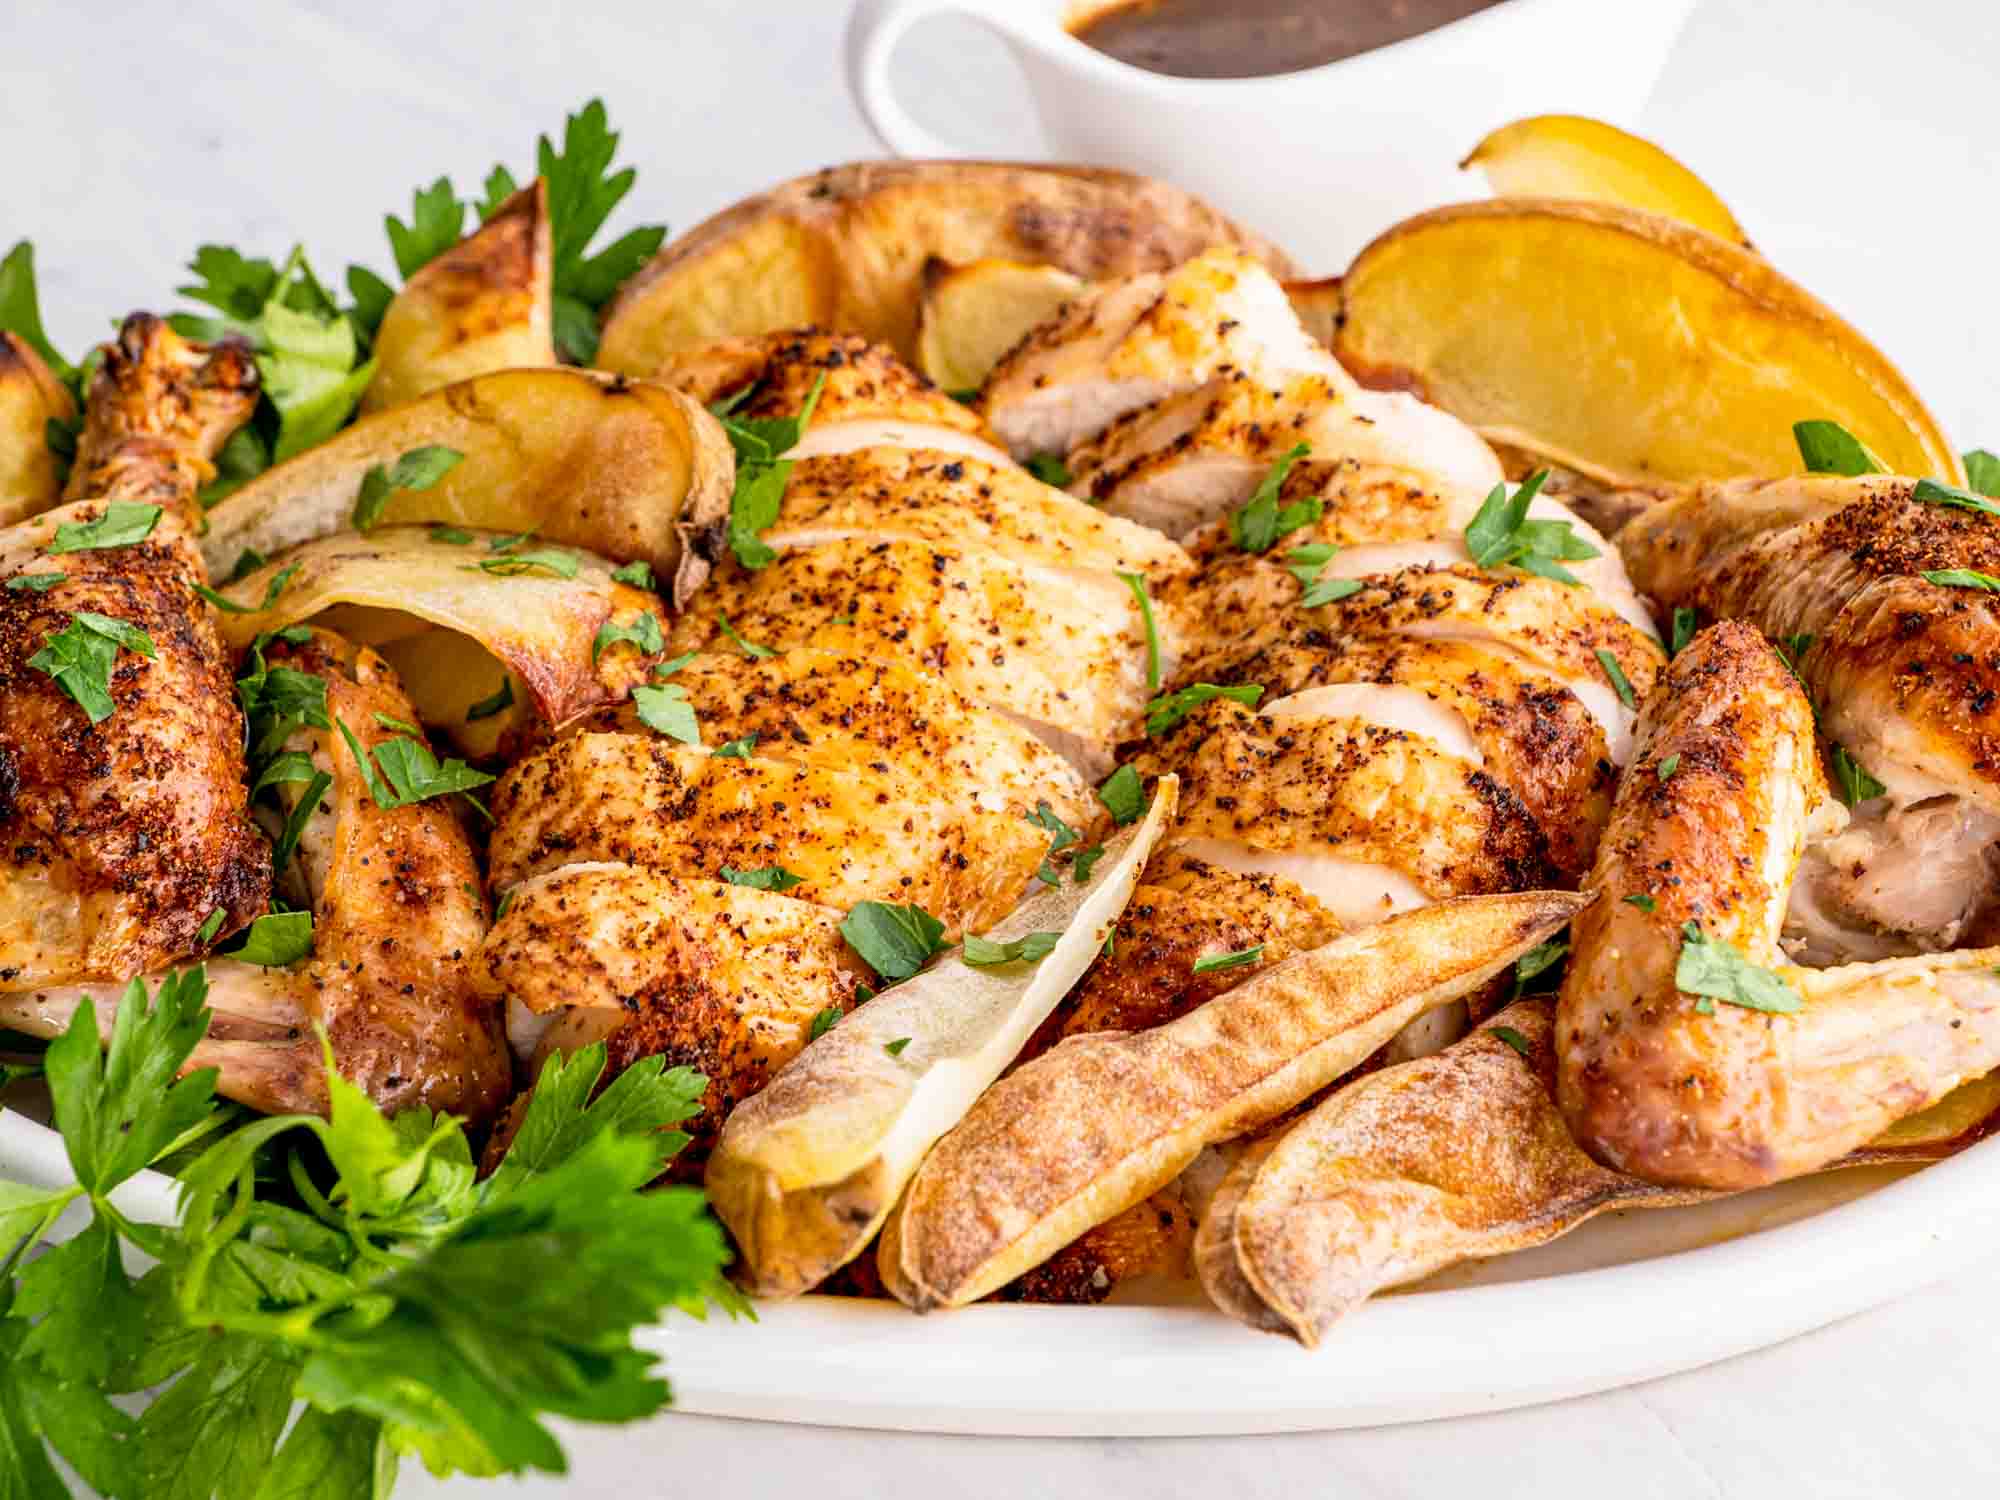 a roast chicken carved from a dish with some roasted potatoes.